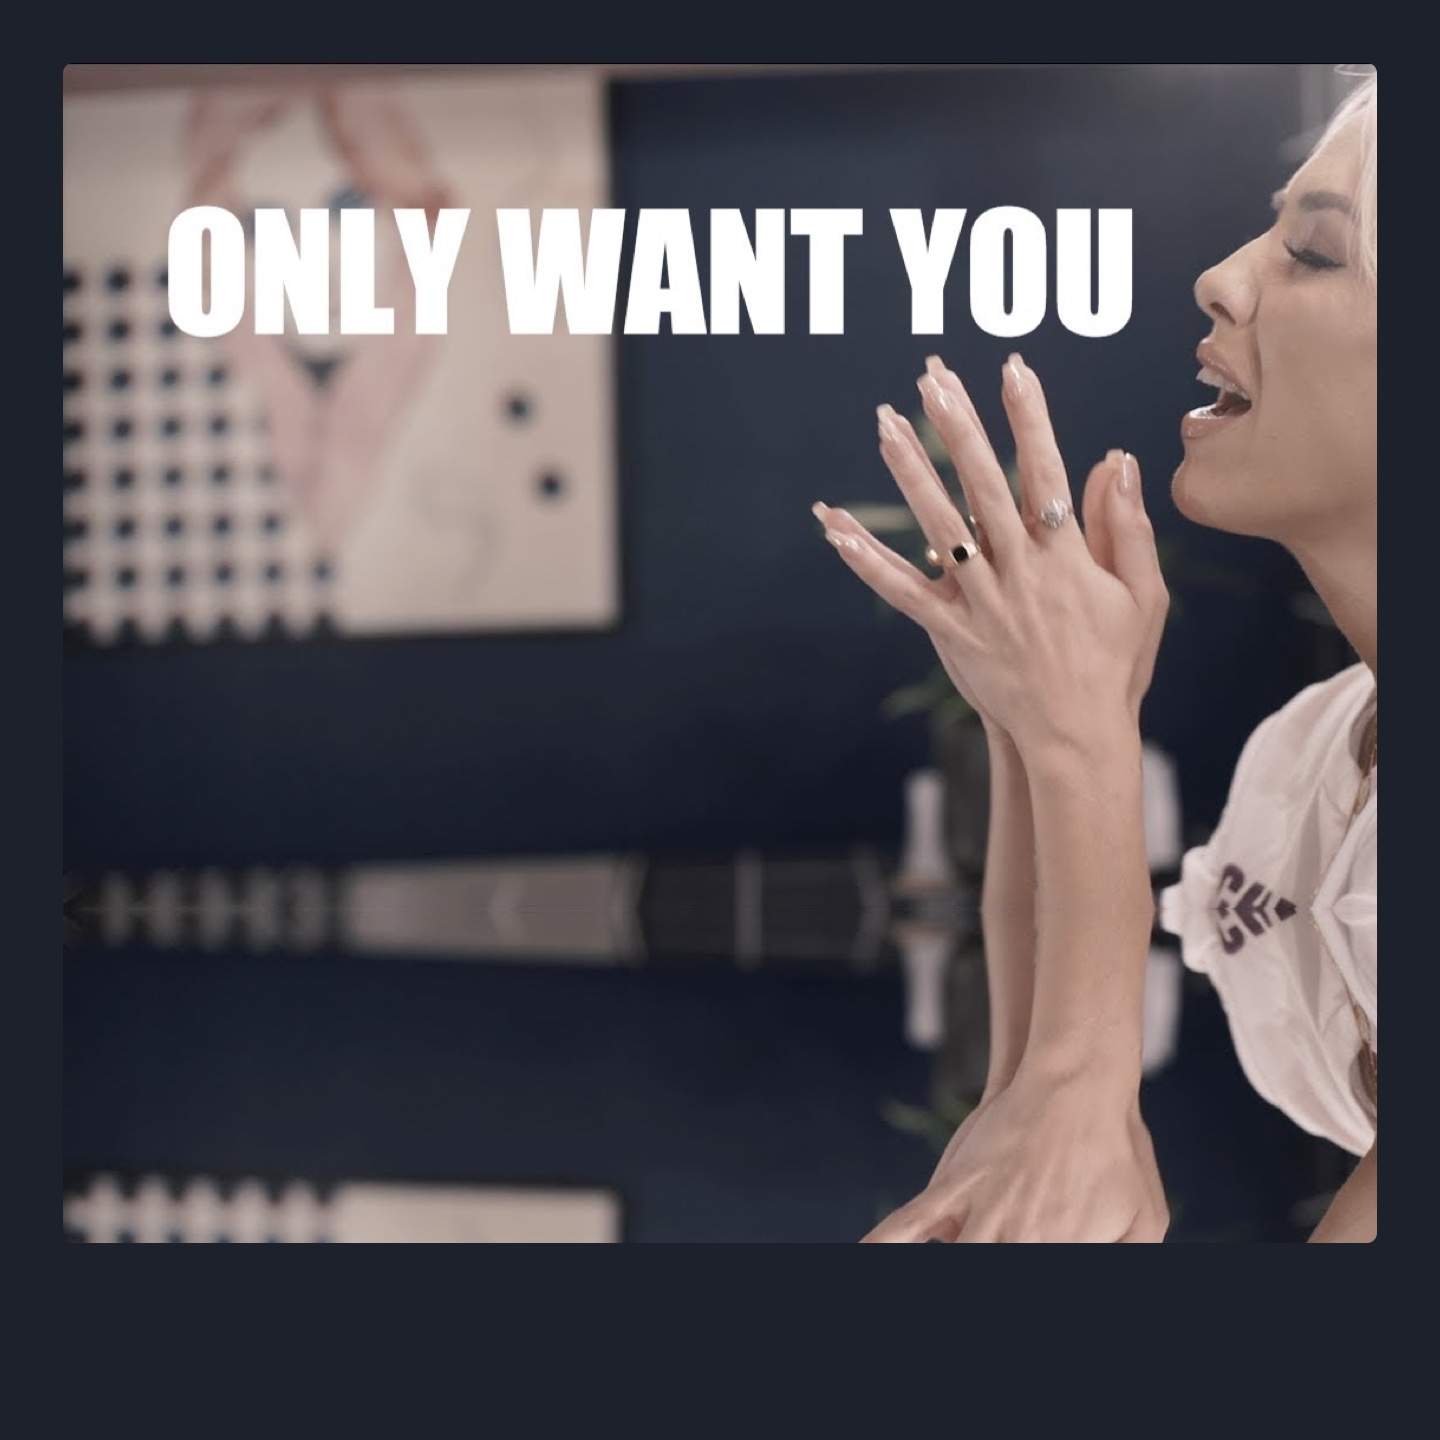 Only Want You -
                    Luxe radio